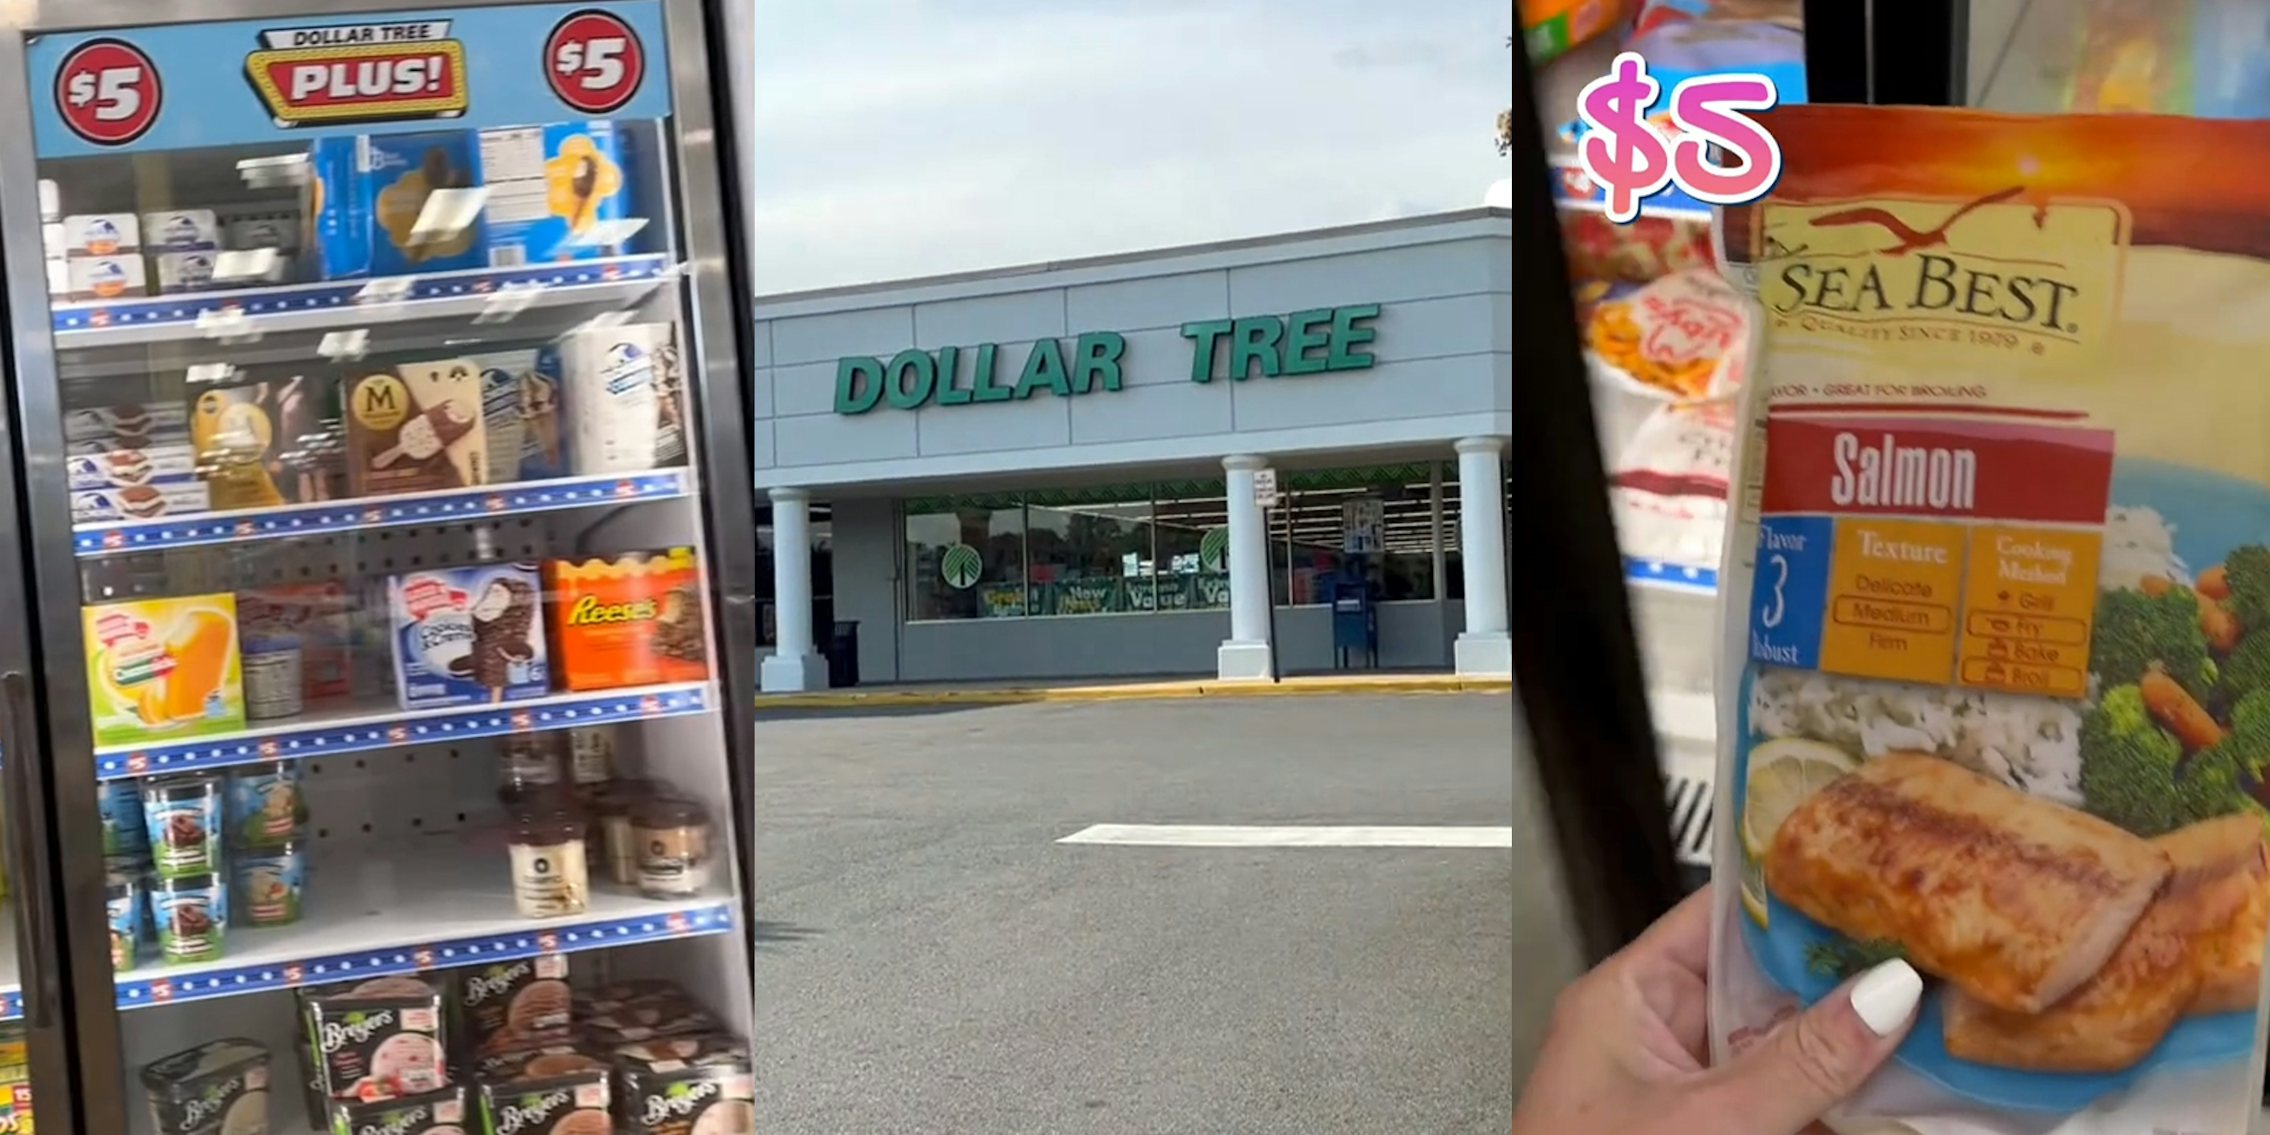 Dollar Tree with a plus section